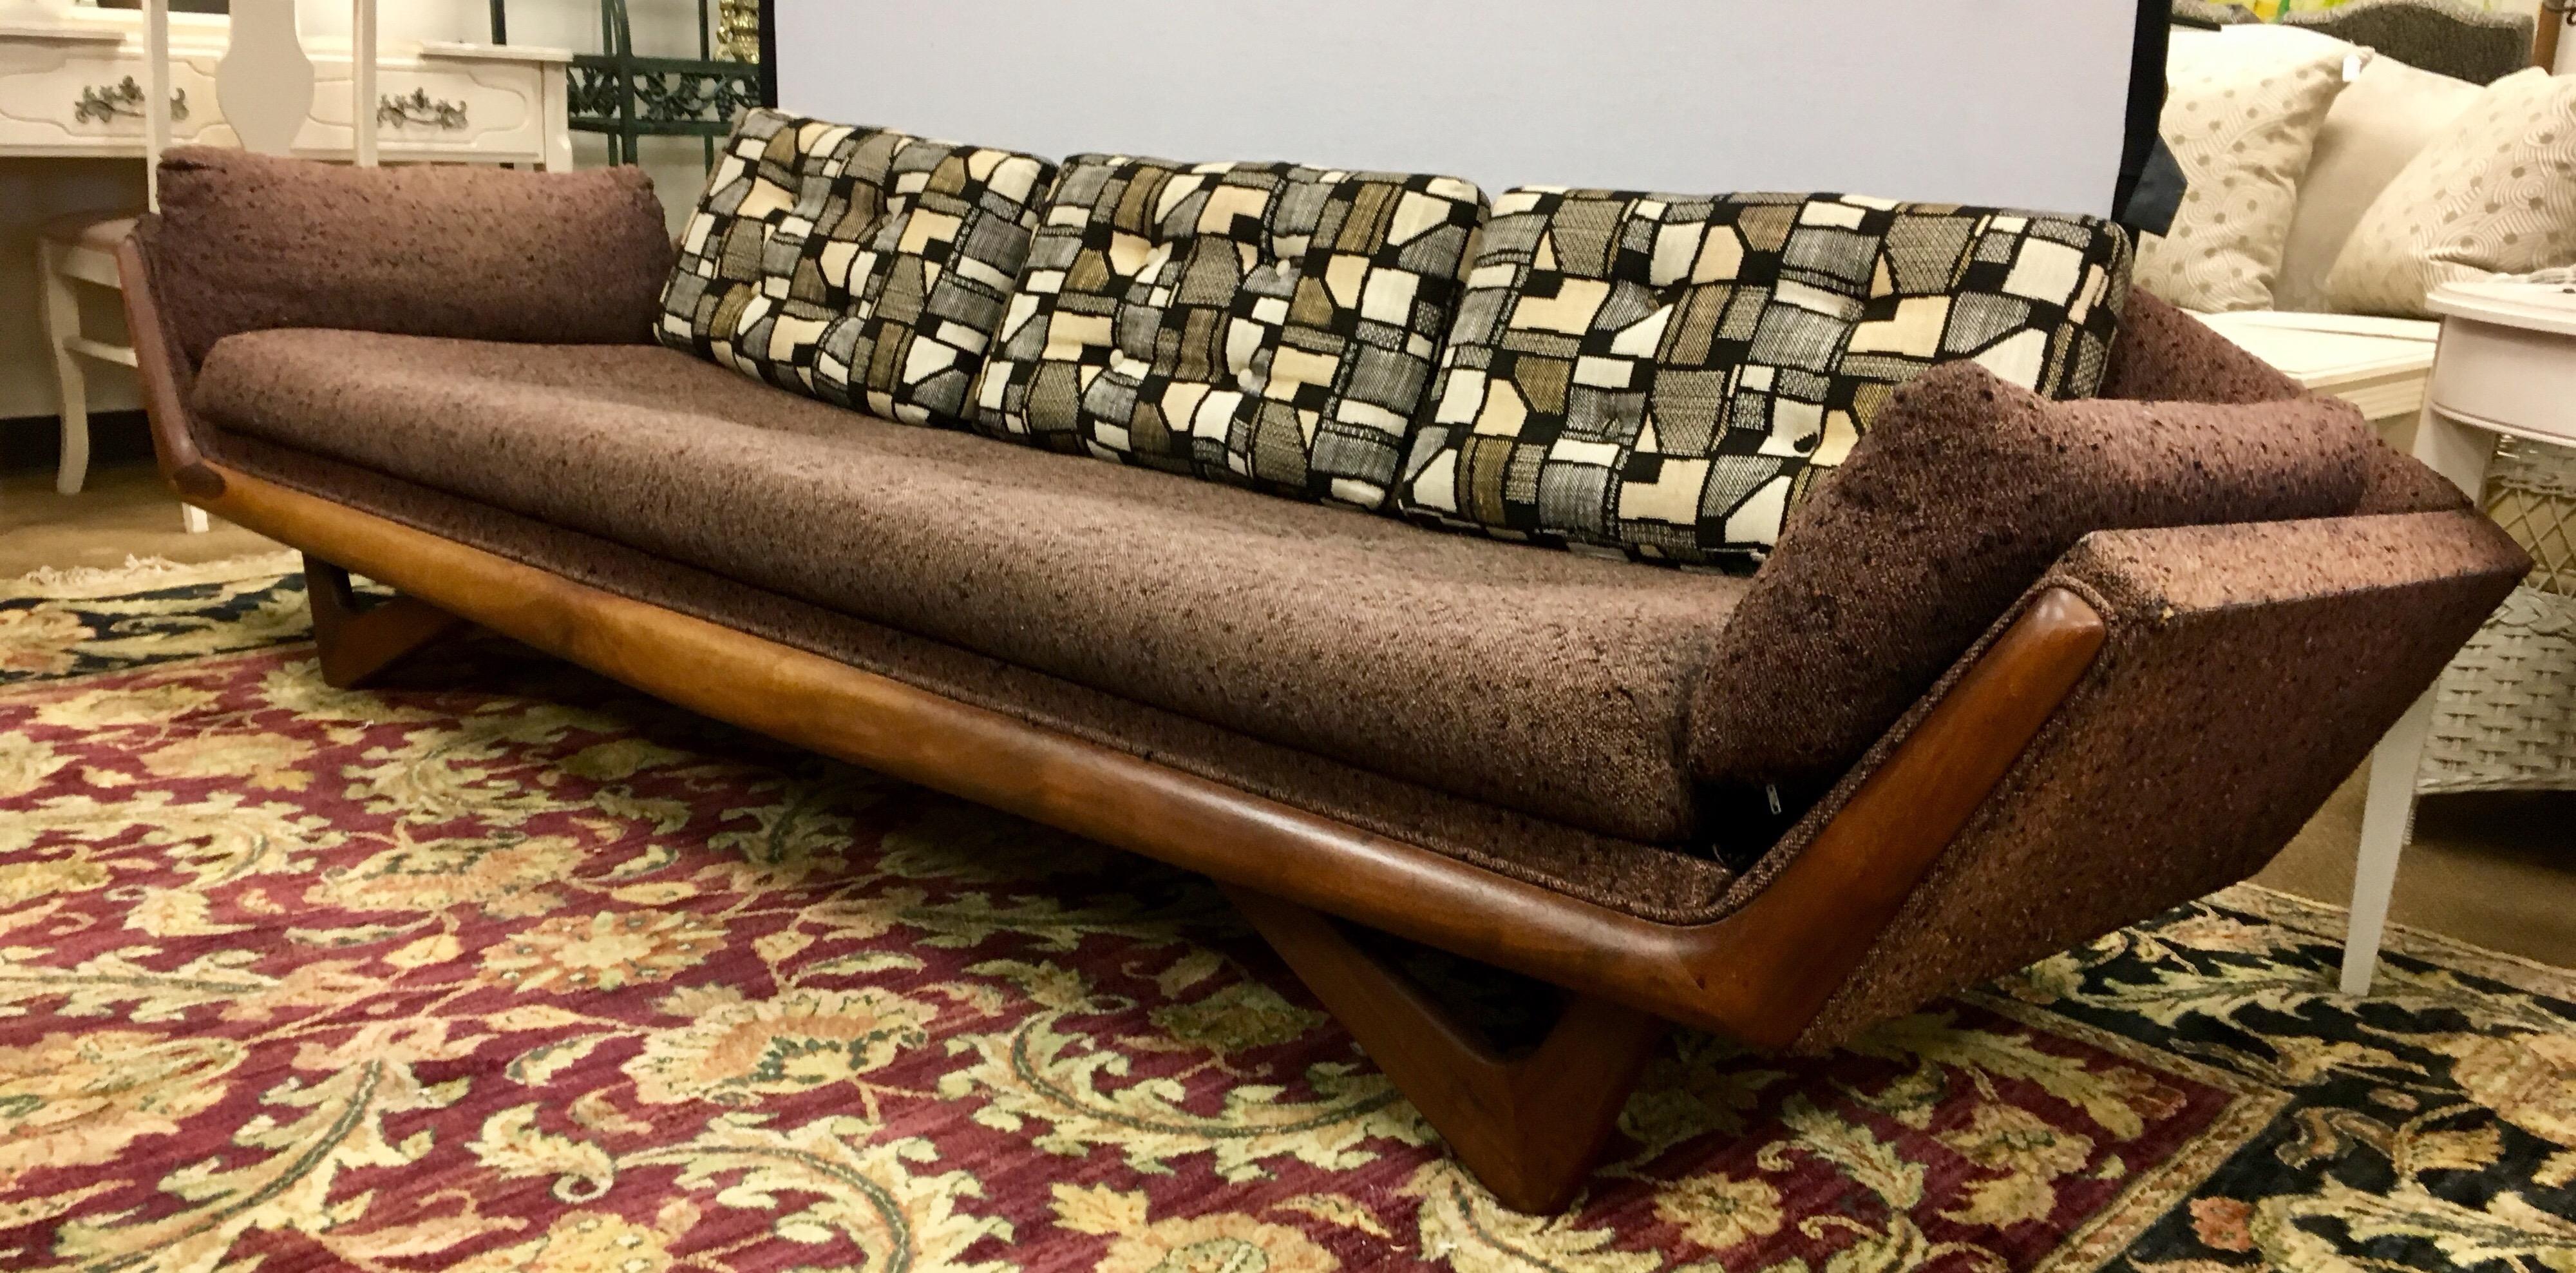 Magnificent signed Craft Associates original Adrian Pearsall Gondola sofa. All walnut has been refurbished including joints, legs and frame. Fabric is original and is in fair condition. See pics.